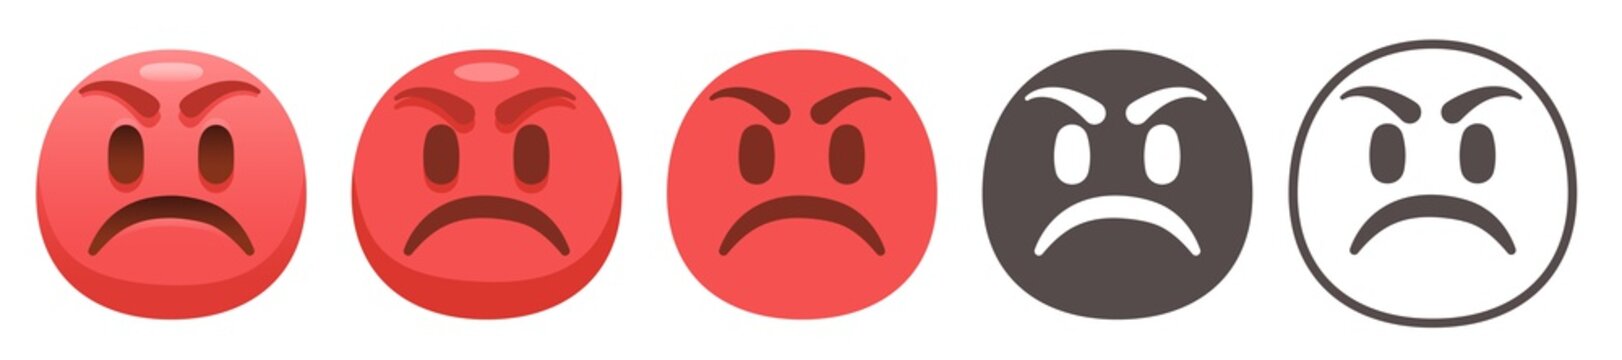 Pouting emoji. Grumpy red face with eyebrows scrunched downward and frowning mouth. Angry emoticon flat vector icon set